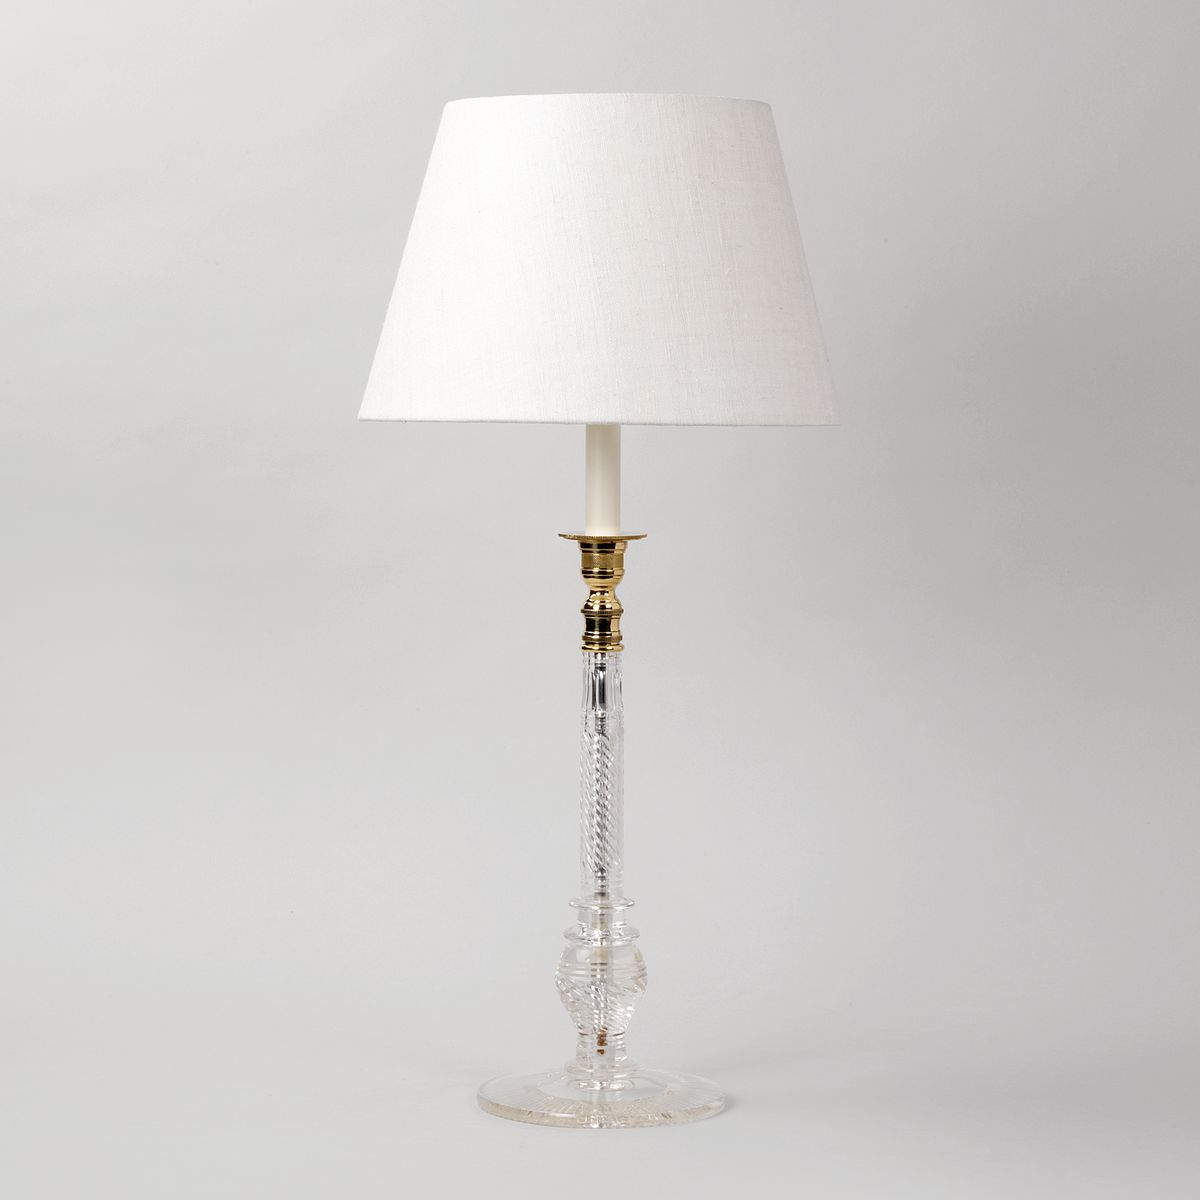 Brass and Glass Candlestick Table Lamp with Laminated Linen Lampshade